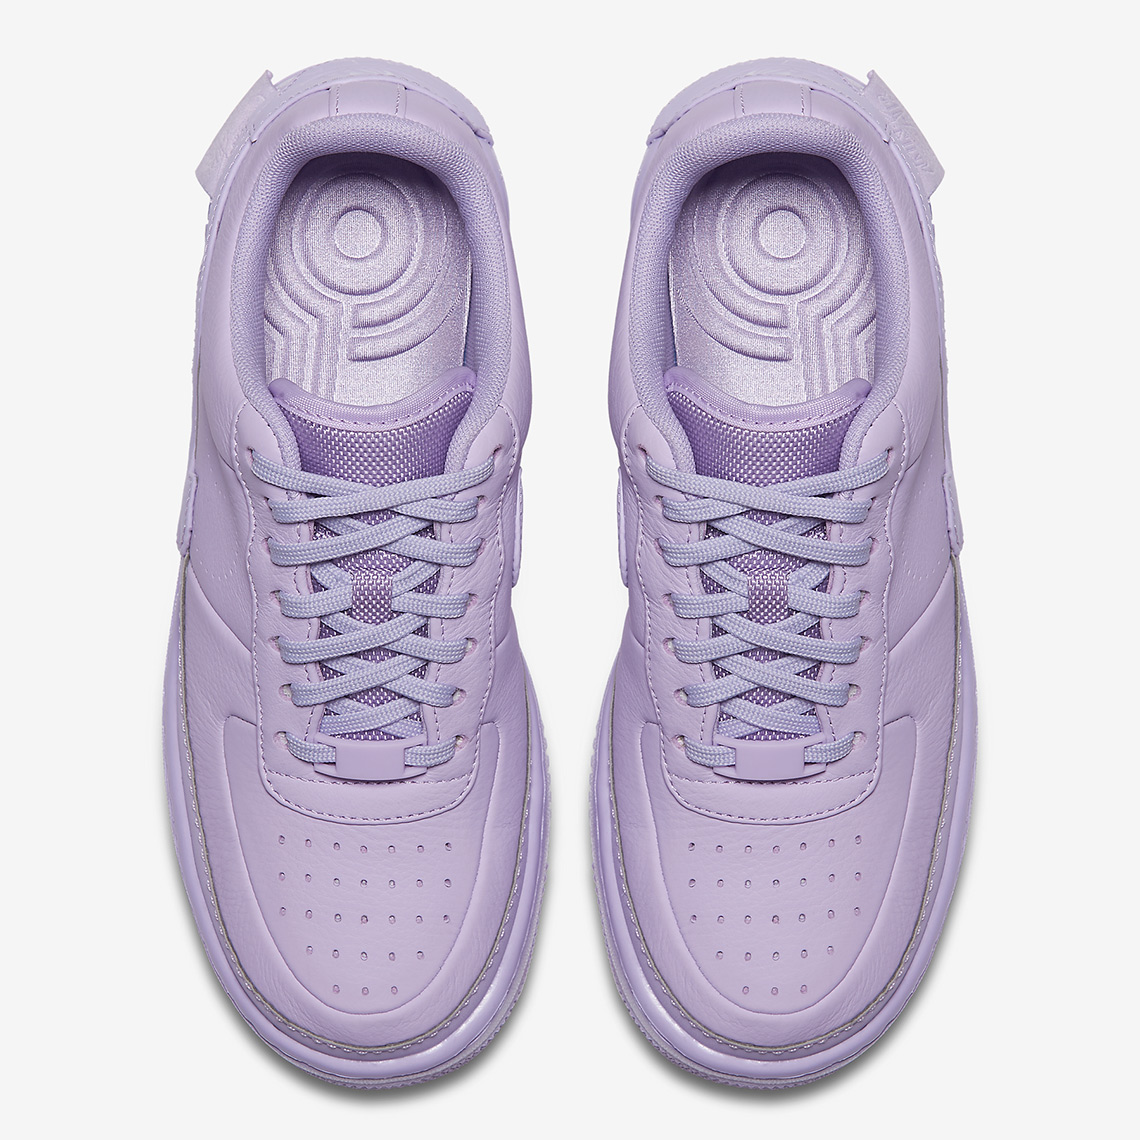 Nike Air Force 1 Low Jester Violet Mist Ao1220 500 5